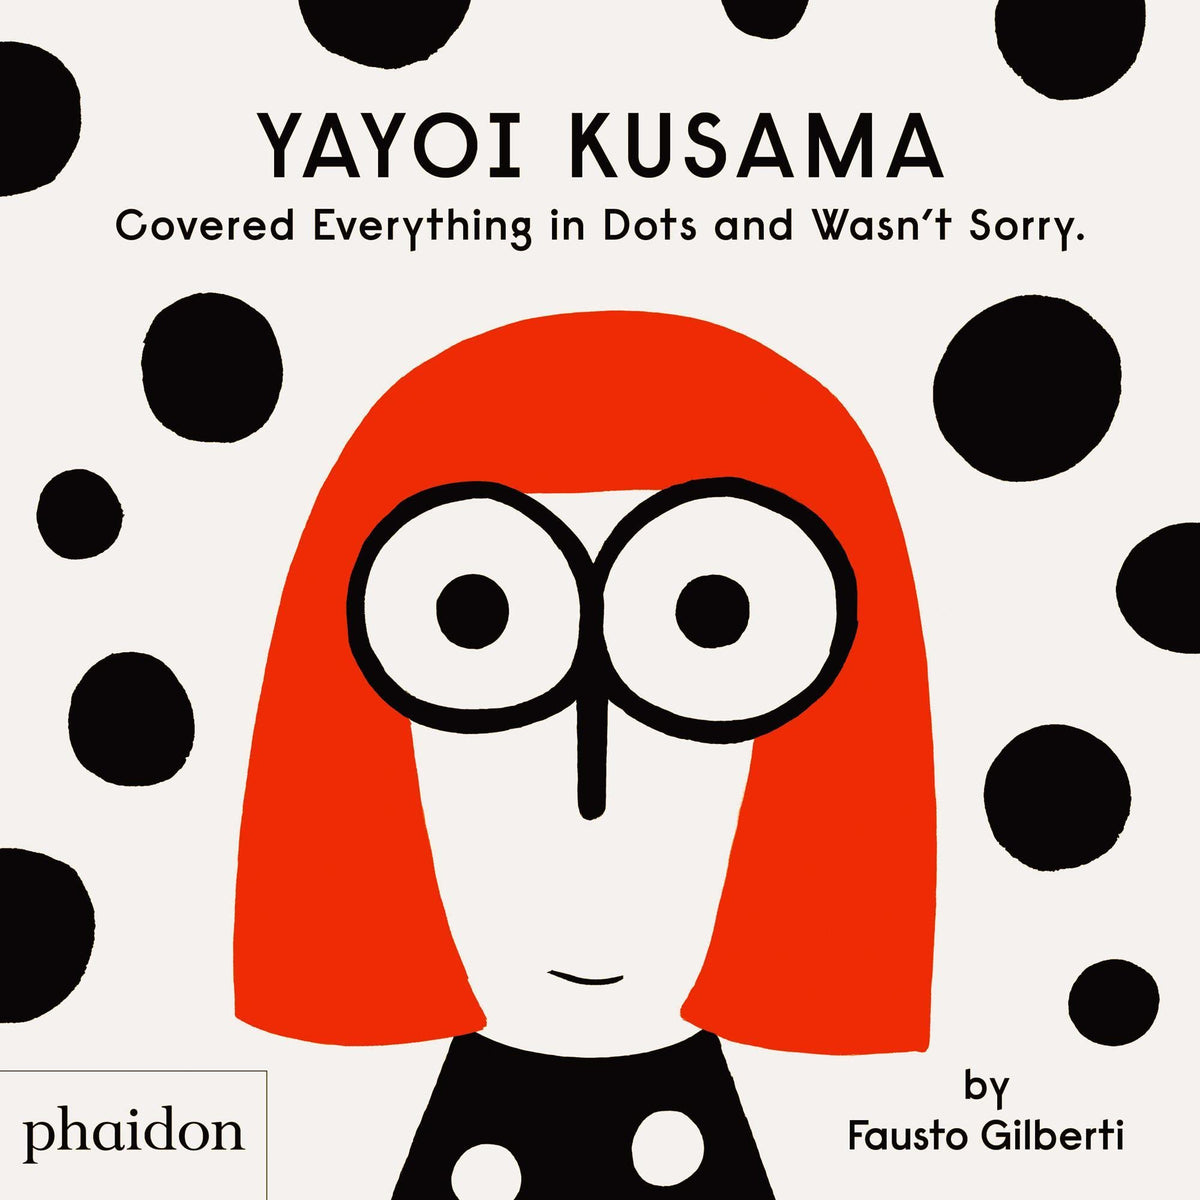 Yayoi Kusama Covered Everything w/Dots and Wasn't Sorry